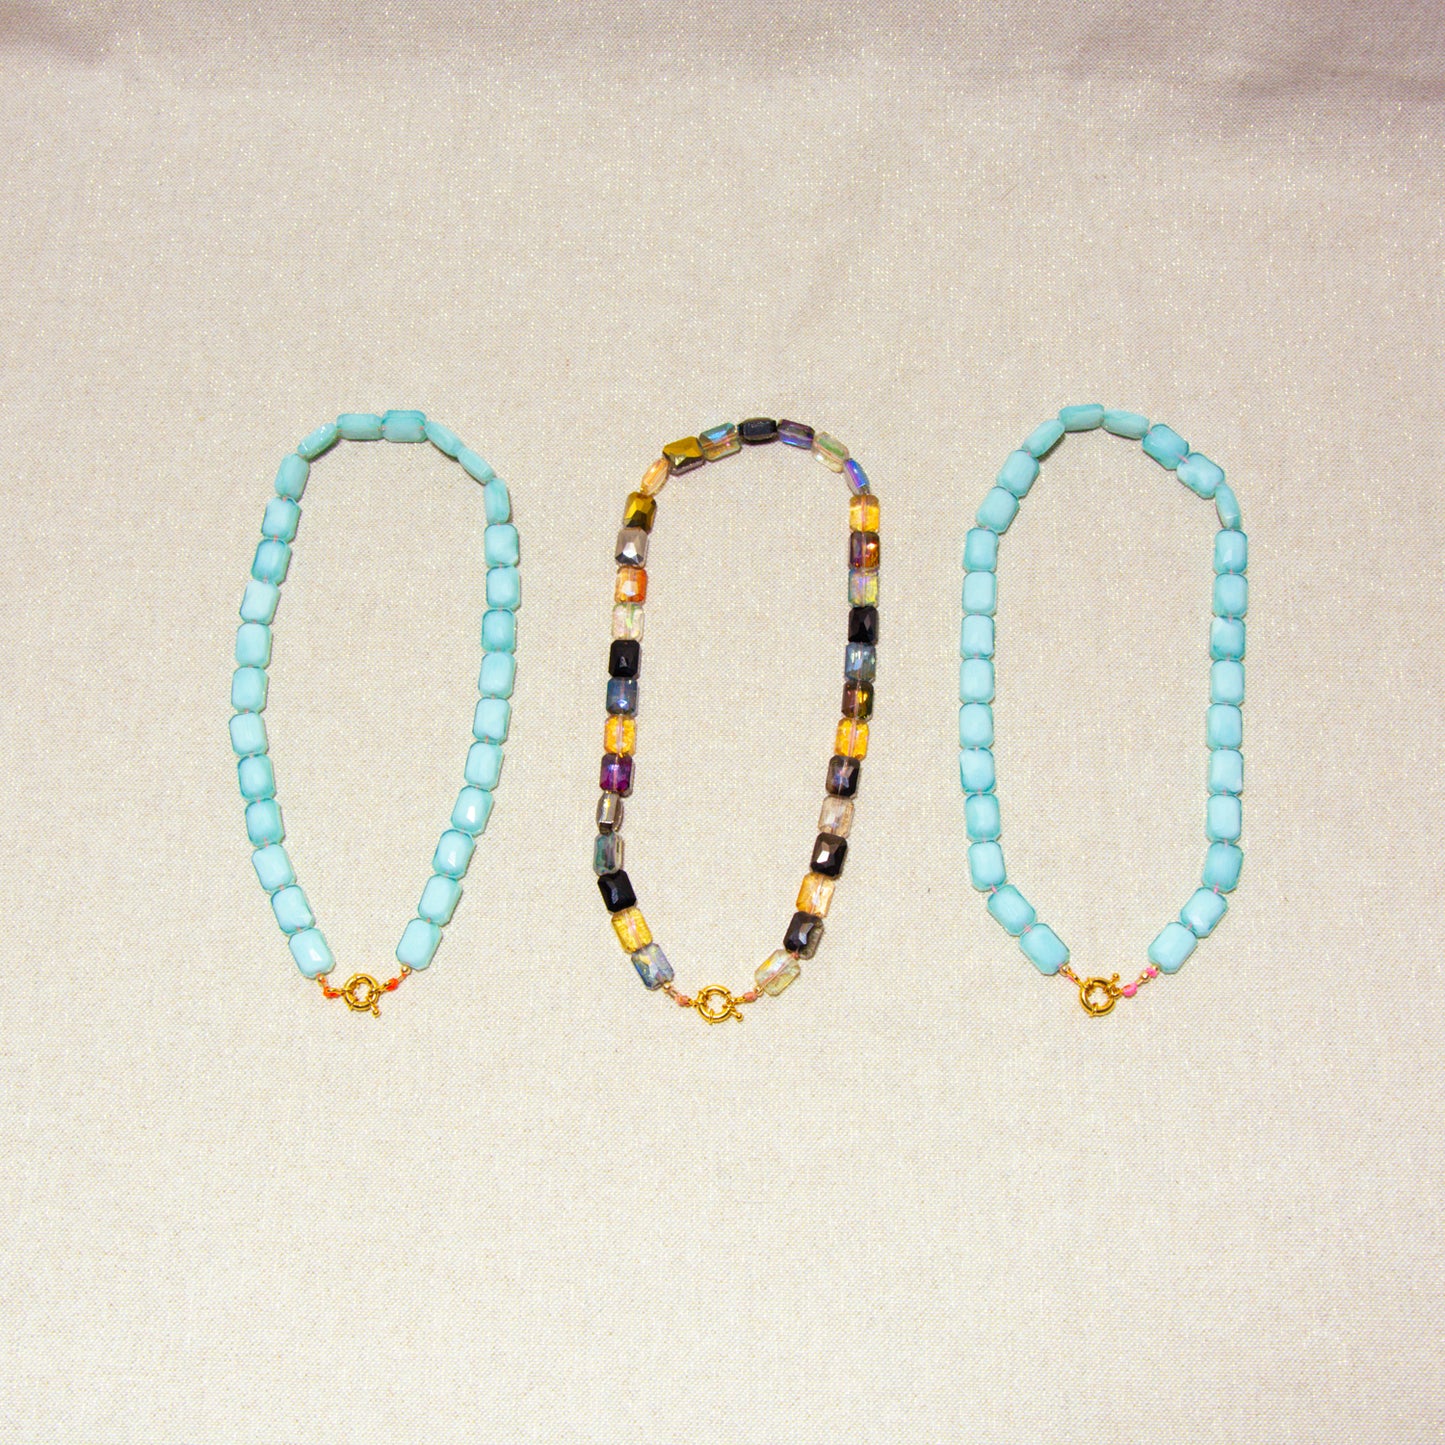 Necklaces - Blue Glass Beads - Neon Brazilian Cord